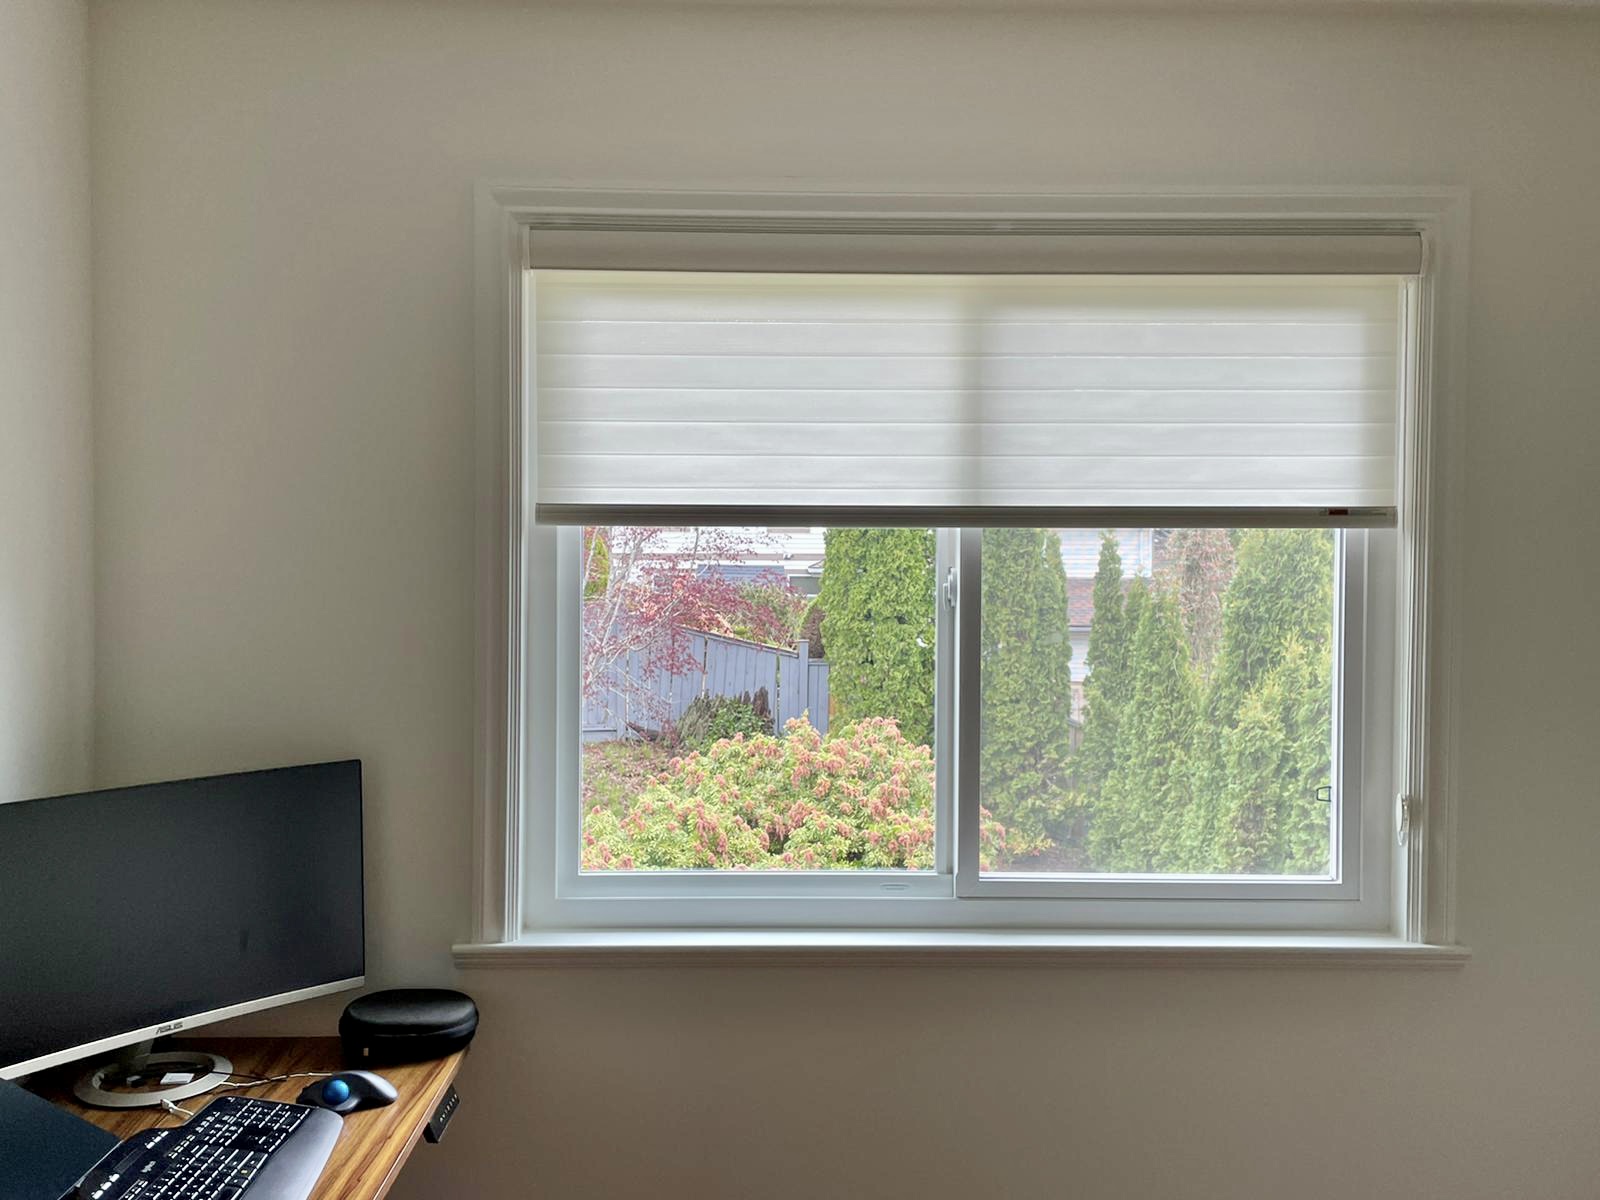 Rayblinds Difference%20between%20blinds%20and%20curtains CURTAINS VS BLINDS: WHICH IS BETTER?  